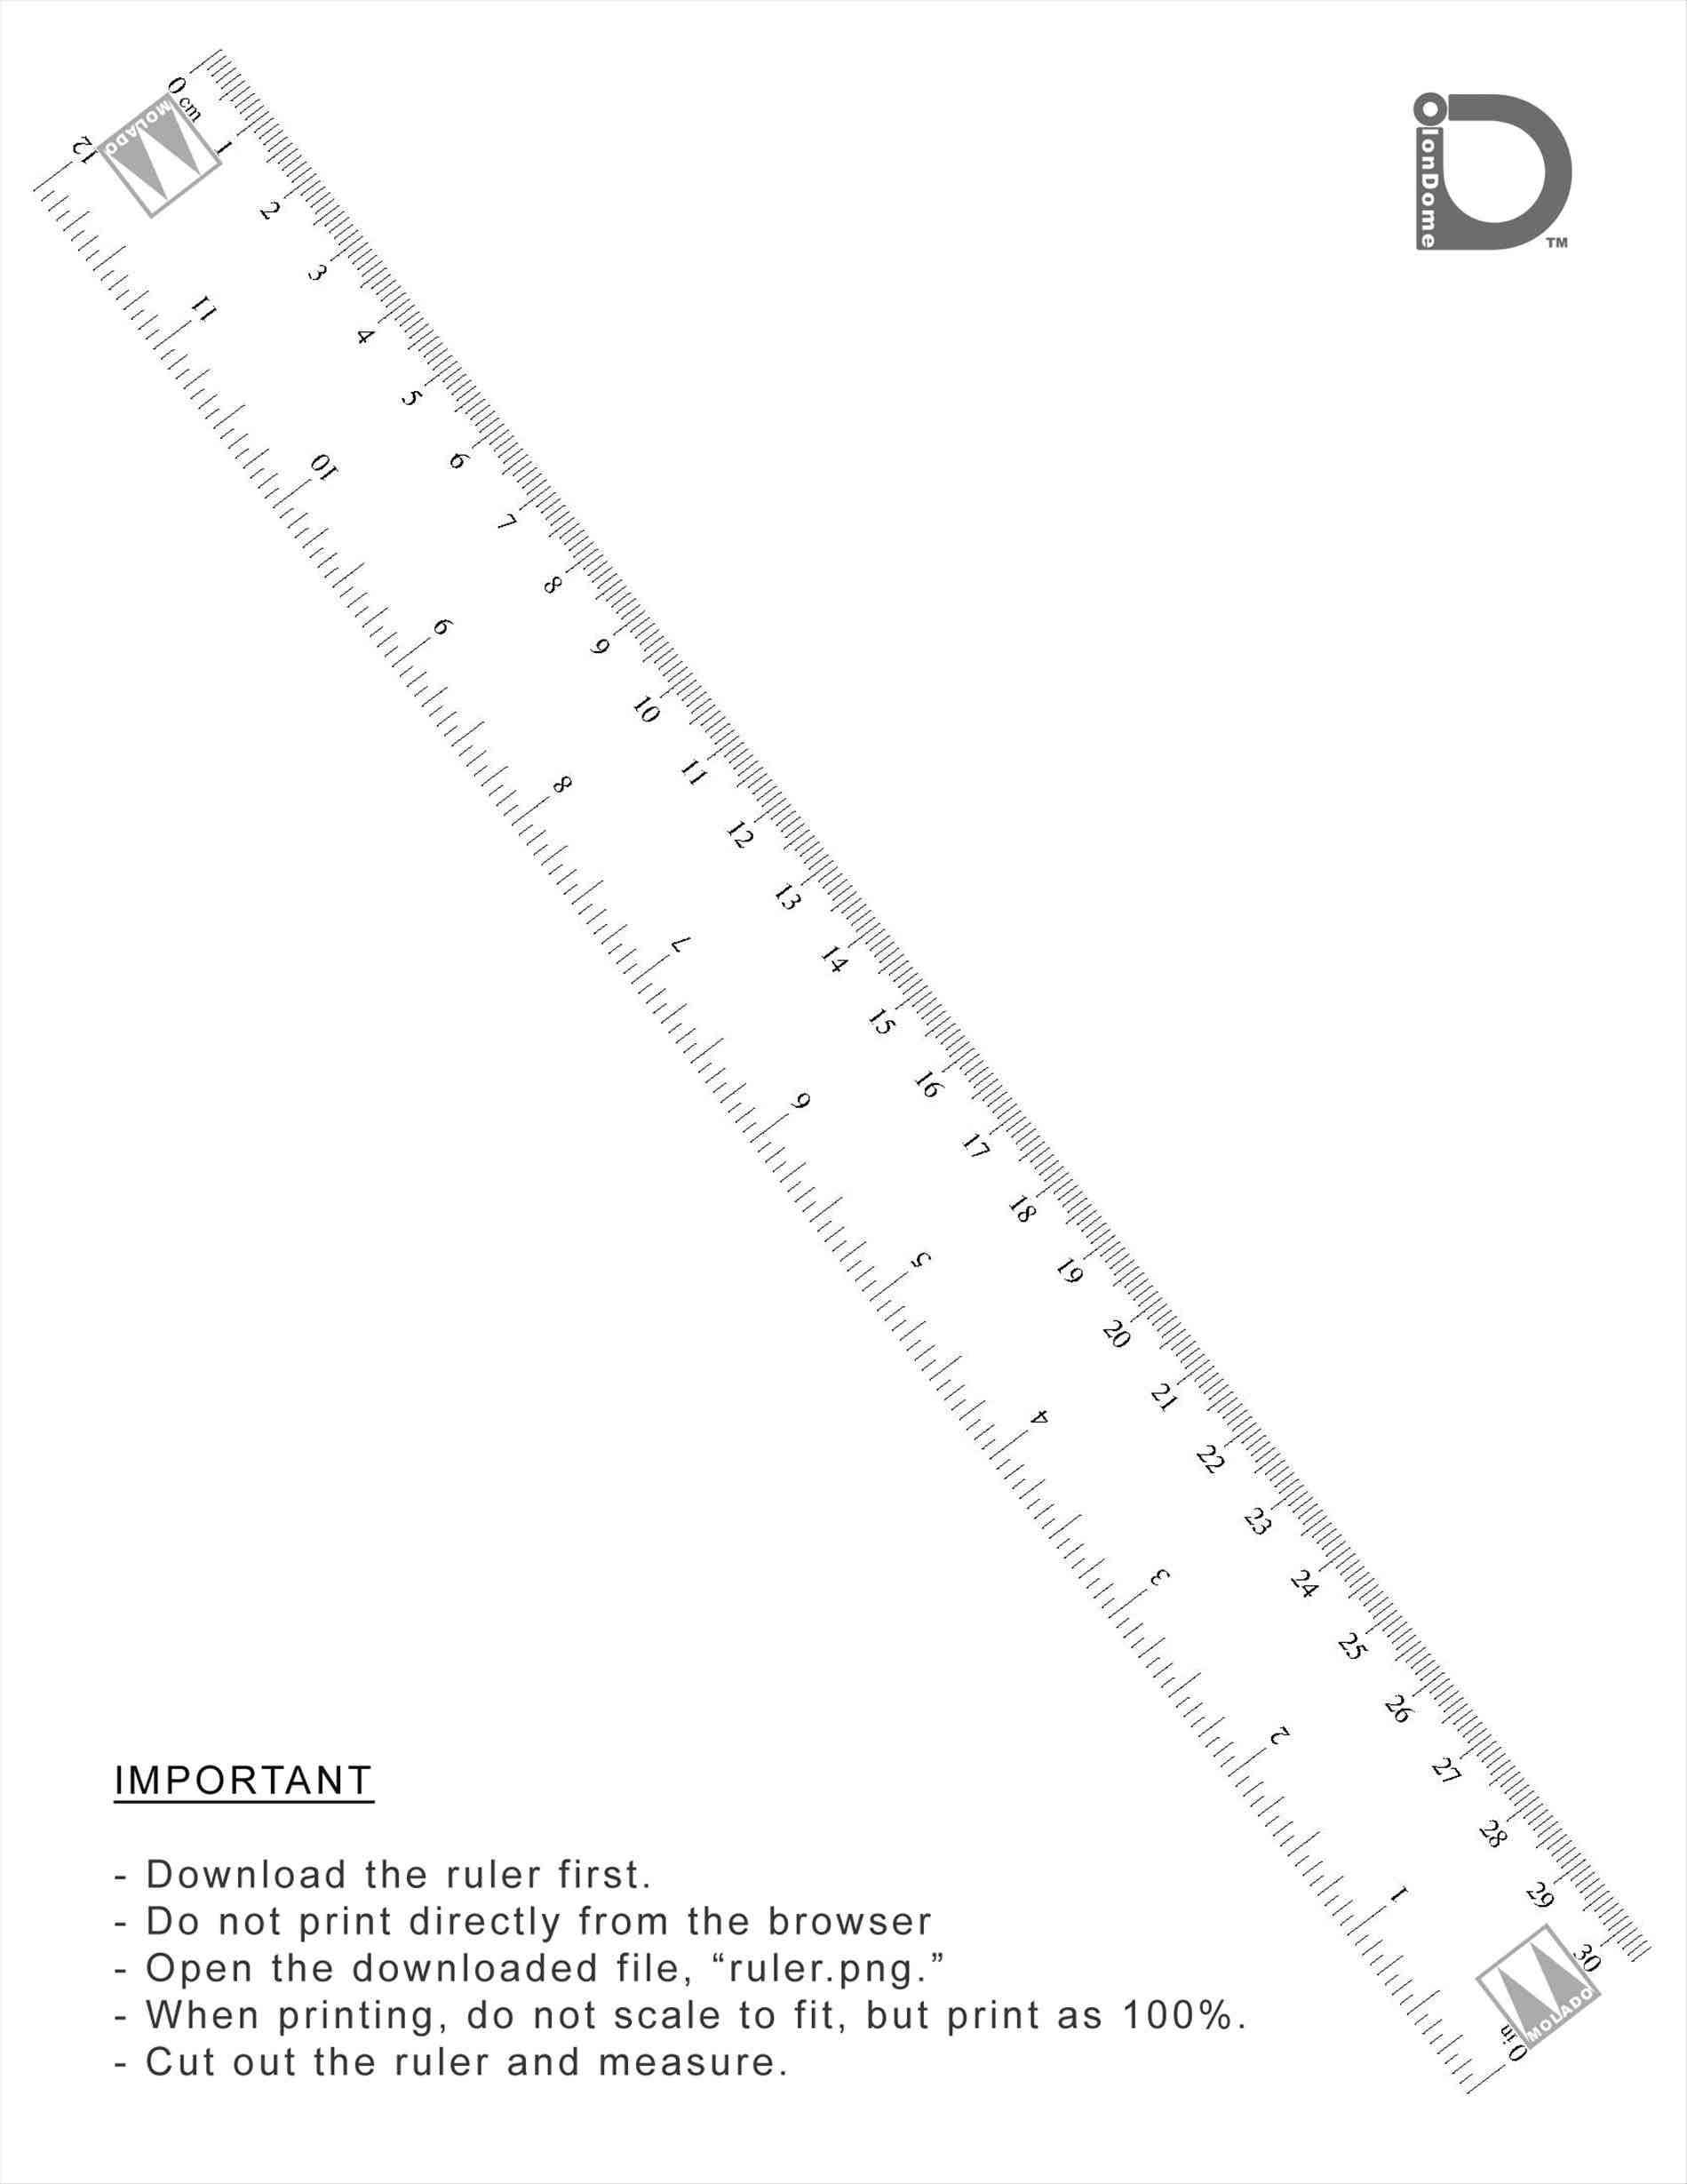 69 Free Printable Rulers | Kittybabylove - Free Printable Cm Ruler